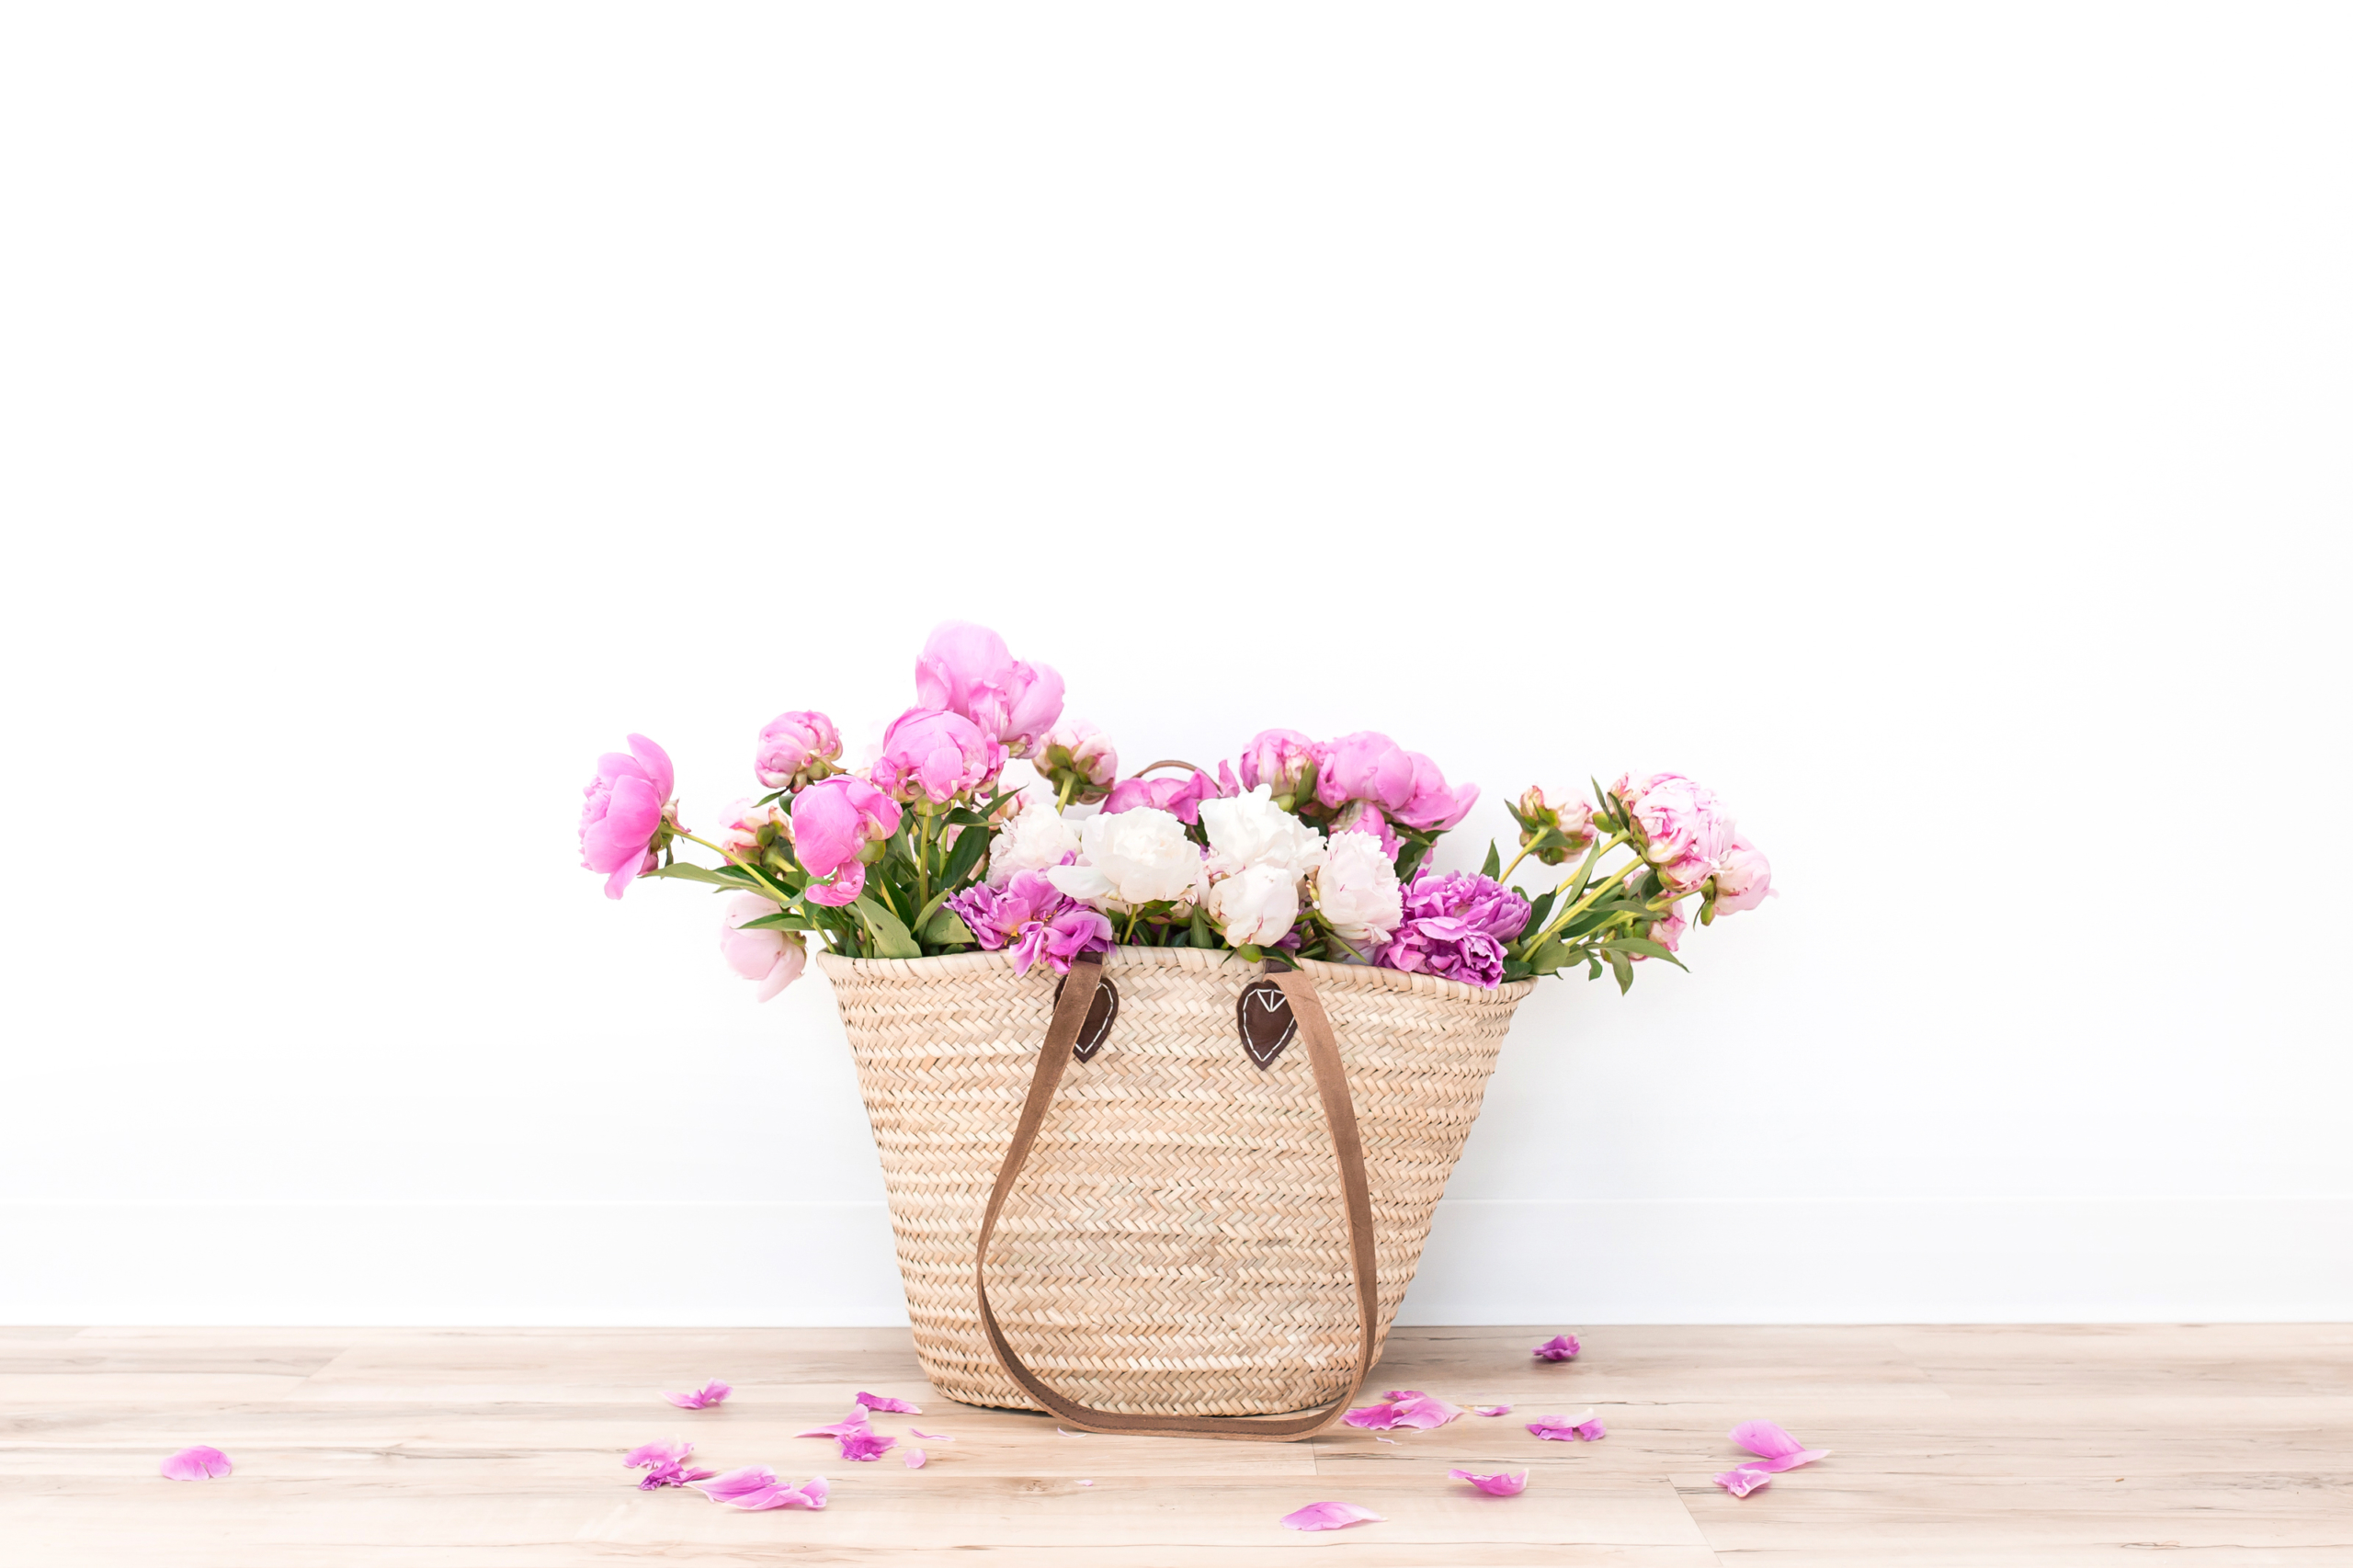 woven tote with peonies spilling out the top